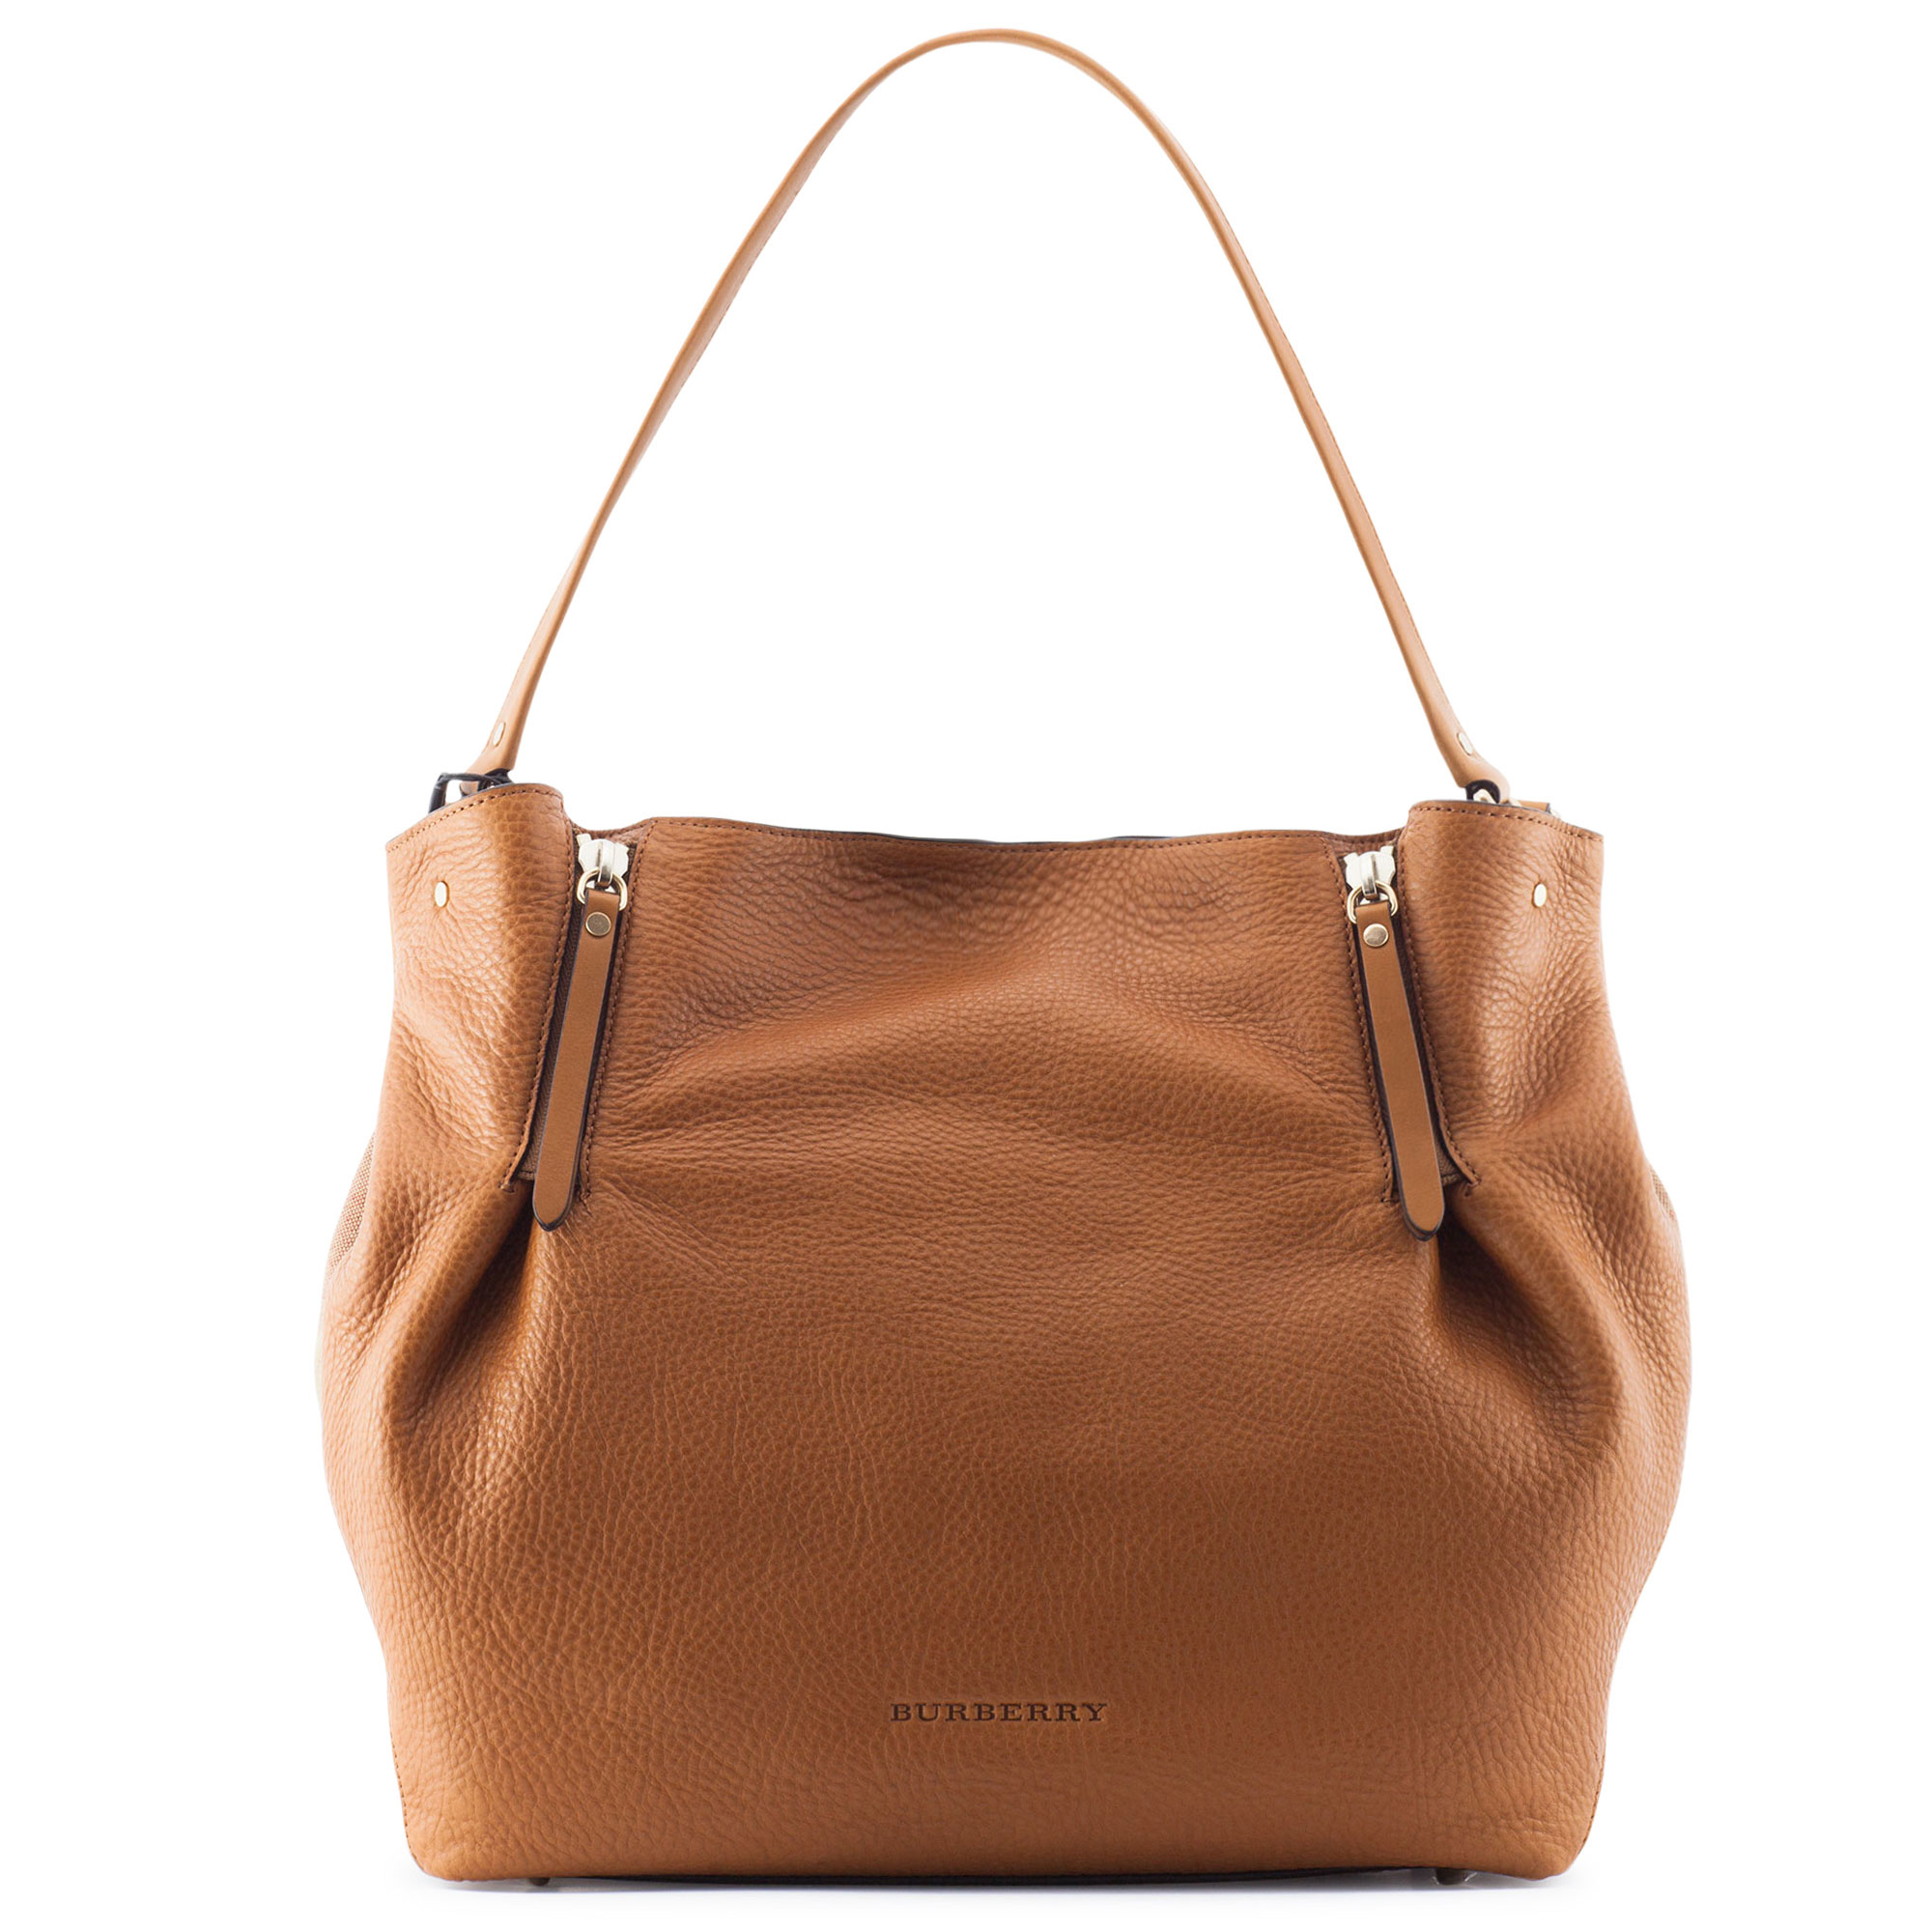 Burberry Leather Tote Bag in Brown - Lyst